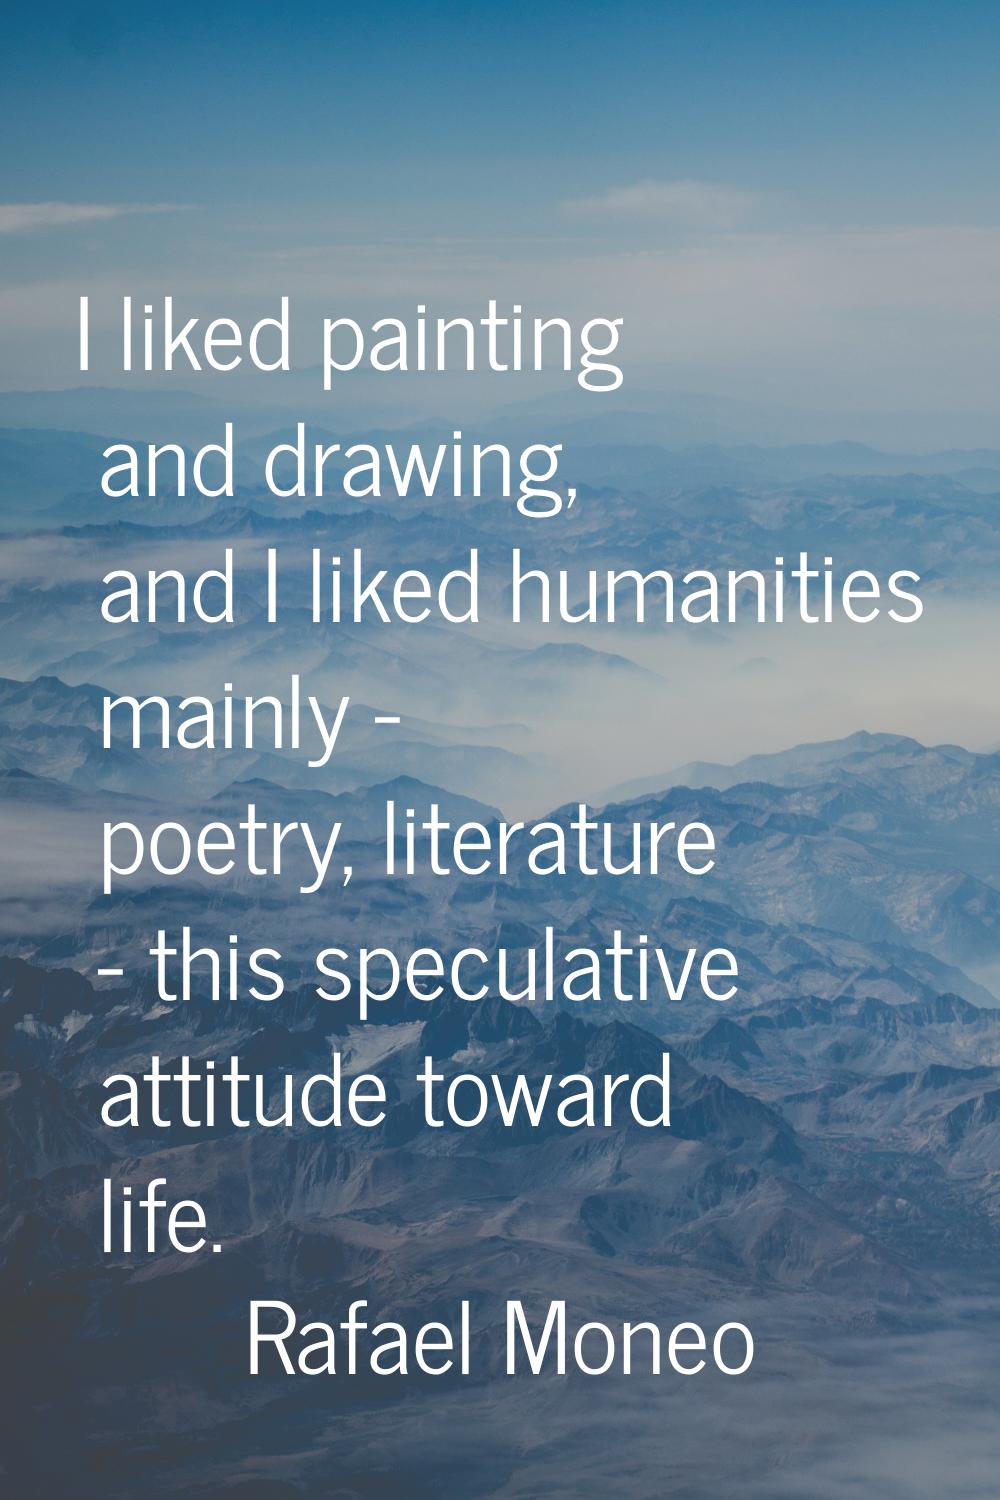 I liked painting and drawing, and I liked humanities mainly - poetry, literature - this speculative